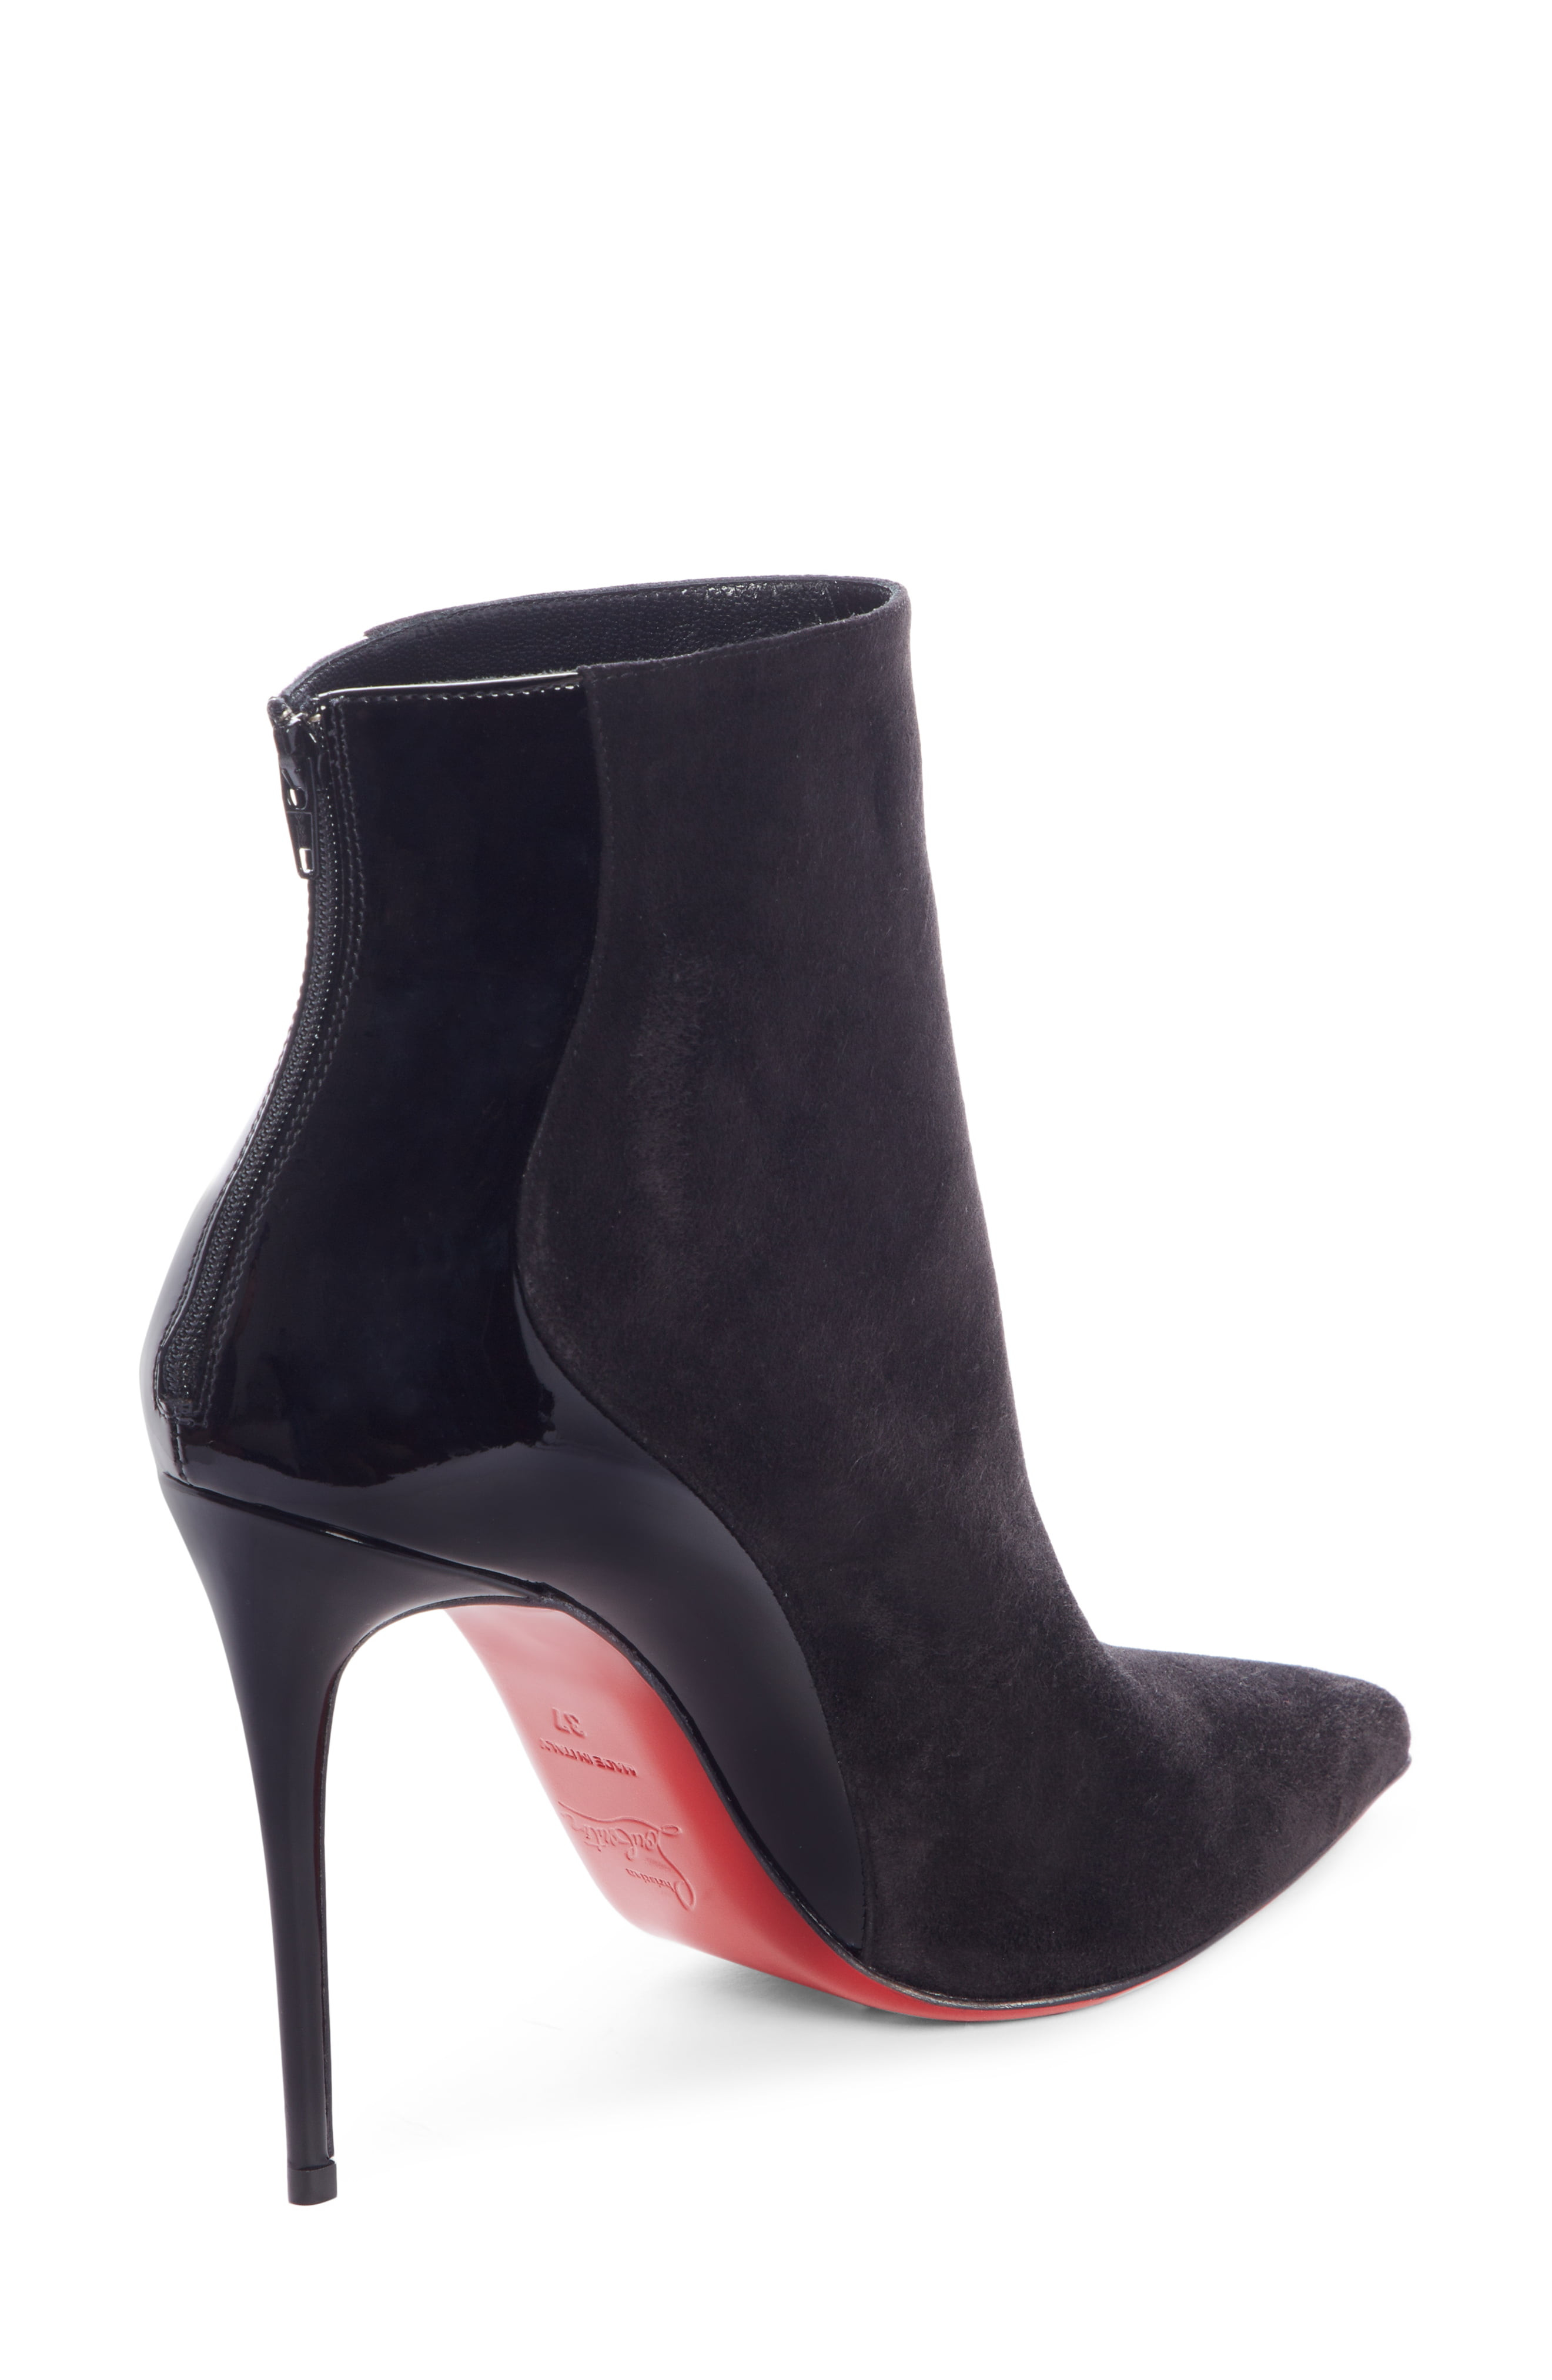 Christian Louboutin Delicotte Pointy Toe Bootie 